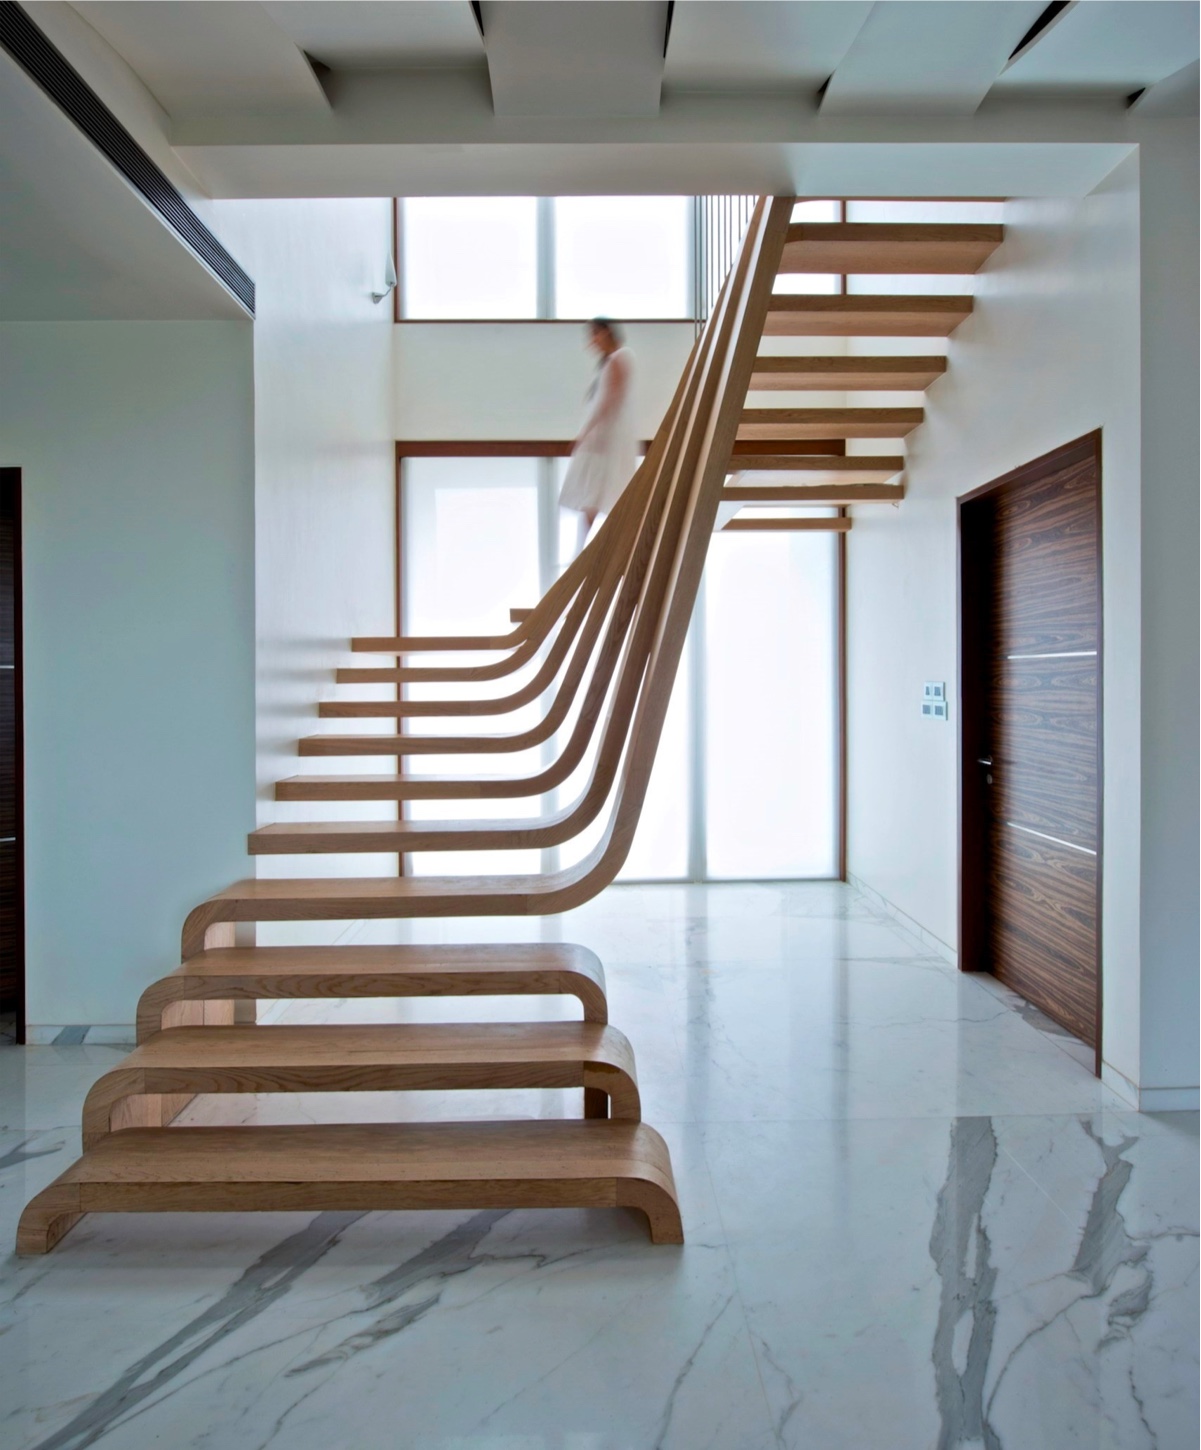 Get canny with curves. These wooden treads arc and slide between the upper and lower levels of the stairway to stunning effect.